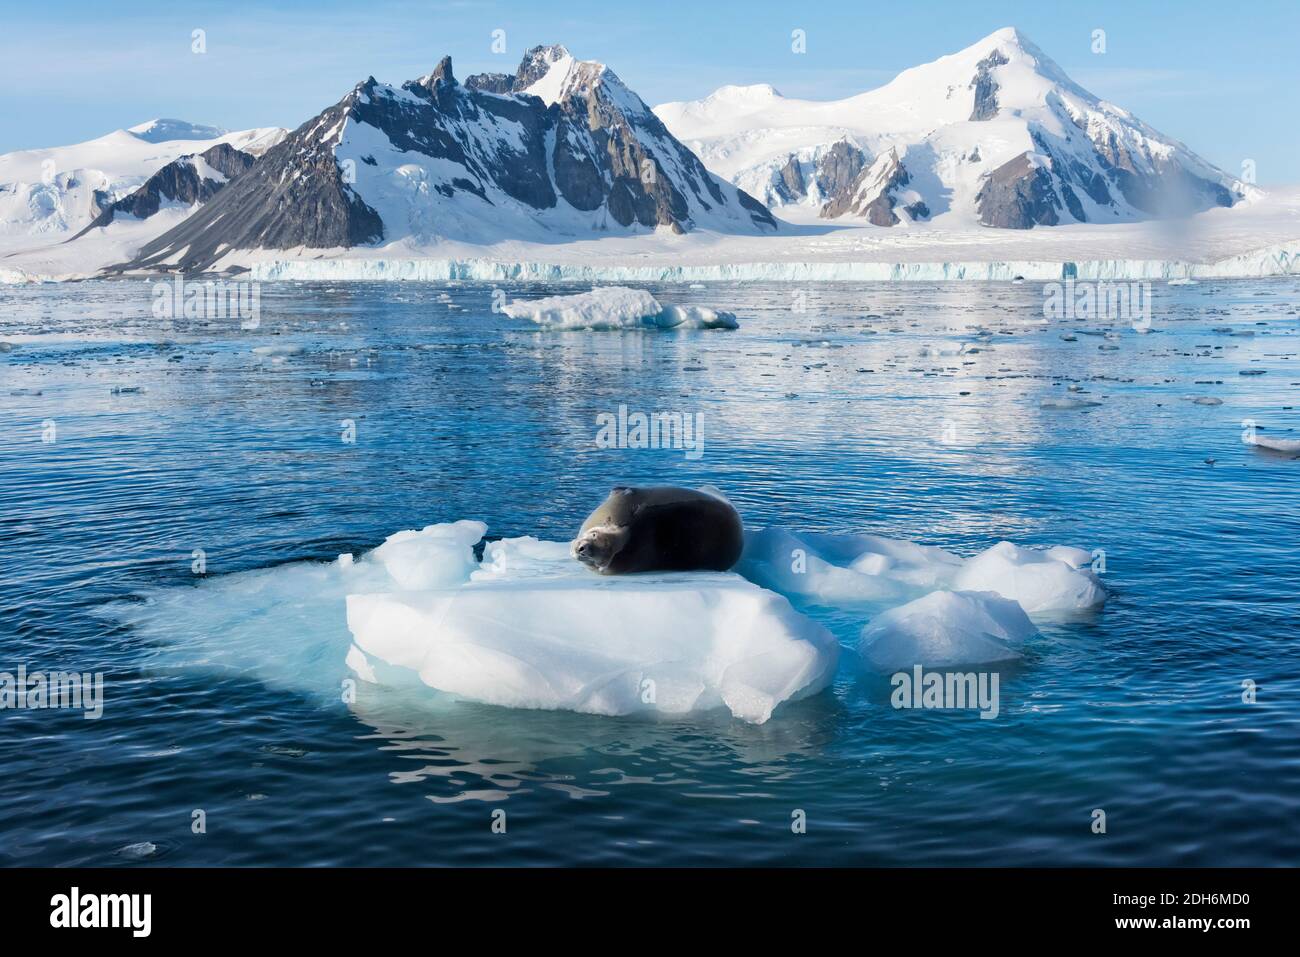 Crabeater seal on floating ice in South Atlantic Ocean, Paradise Bay, Antarctica Stock Photo